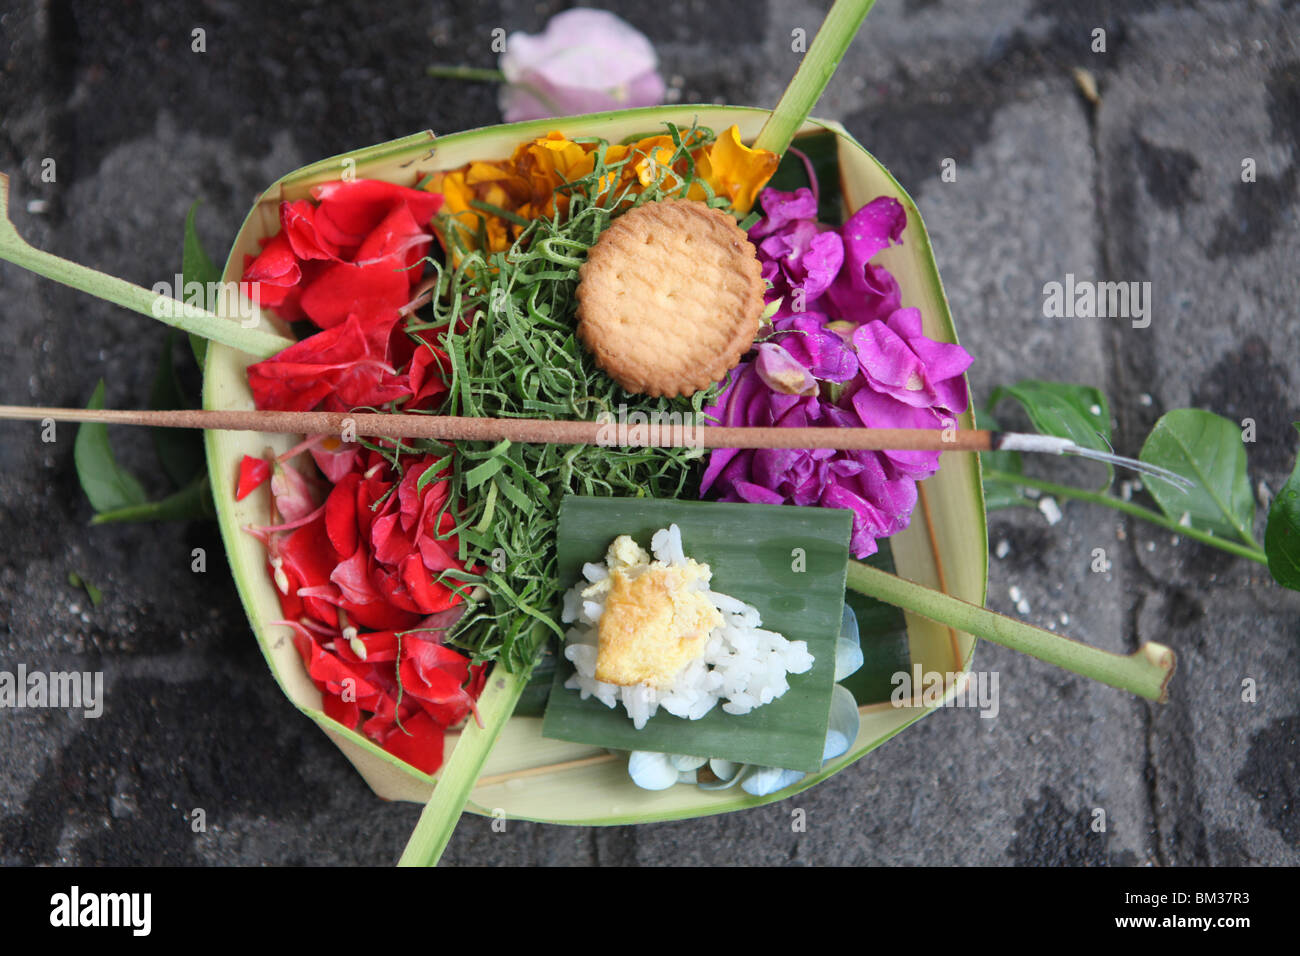 A freshly placed offering to the gods on the street in Kuta, Bali, Indonesia Stock Photo